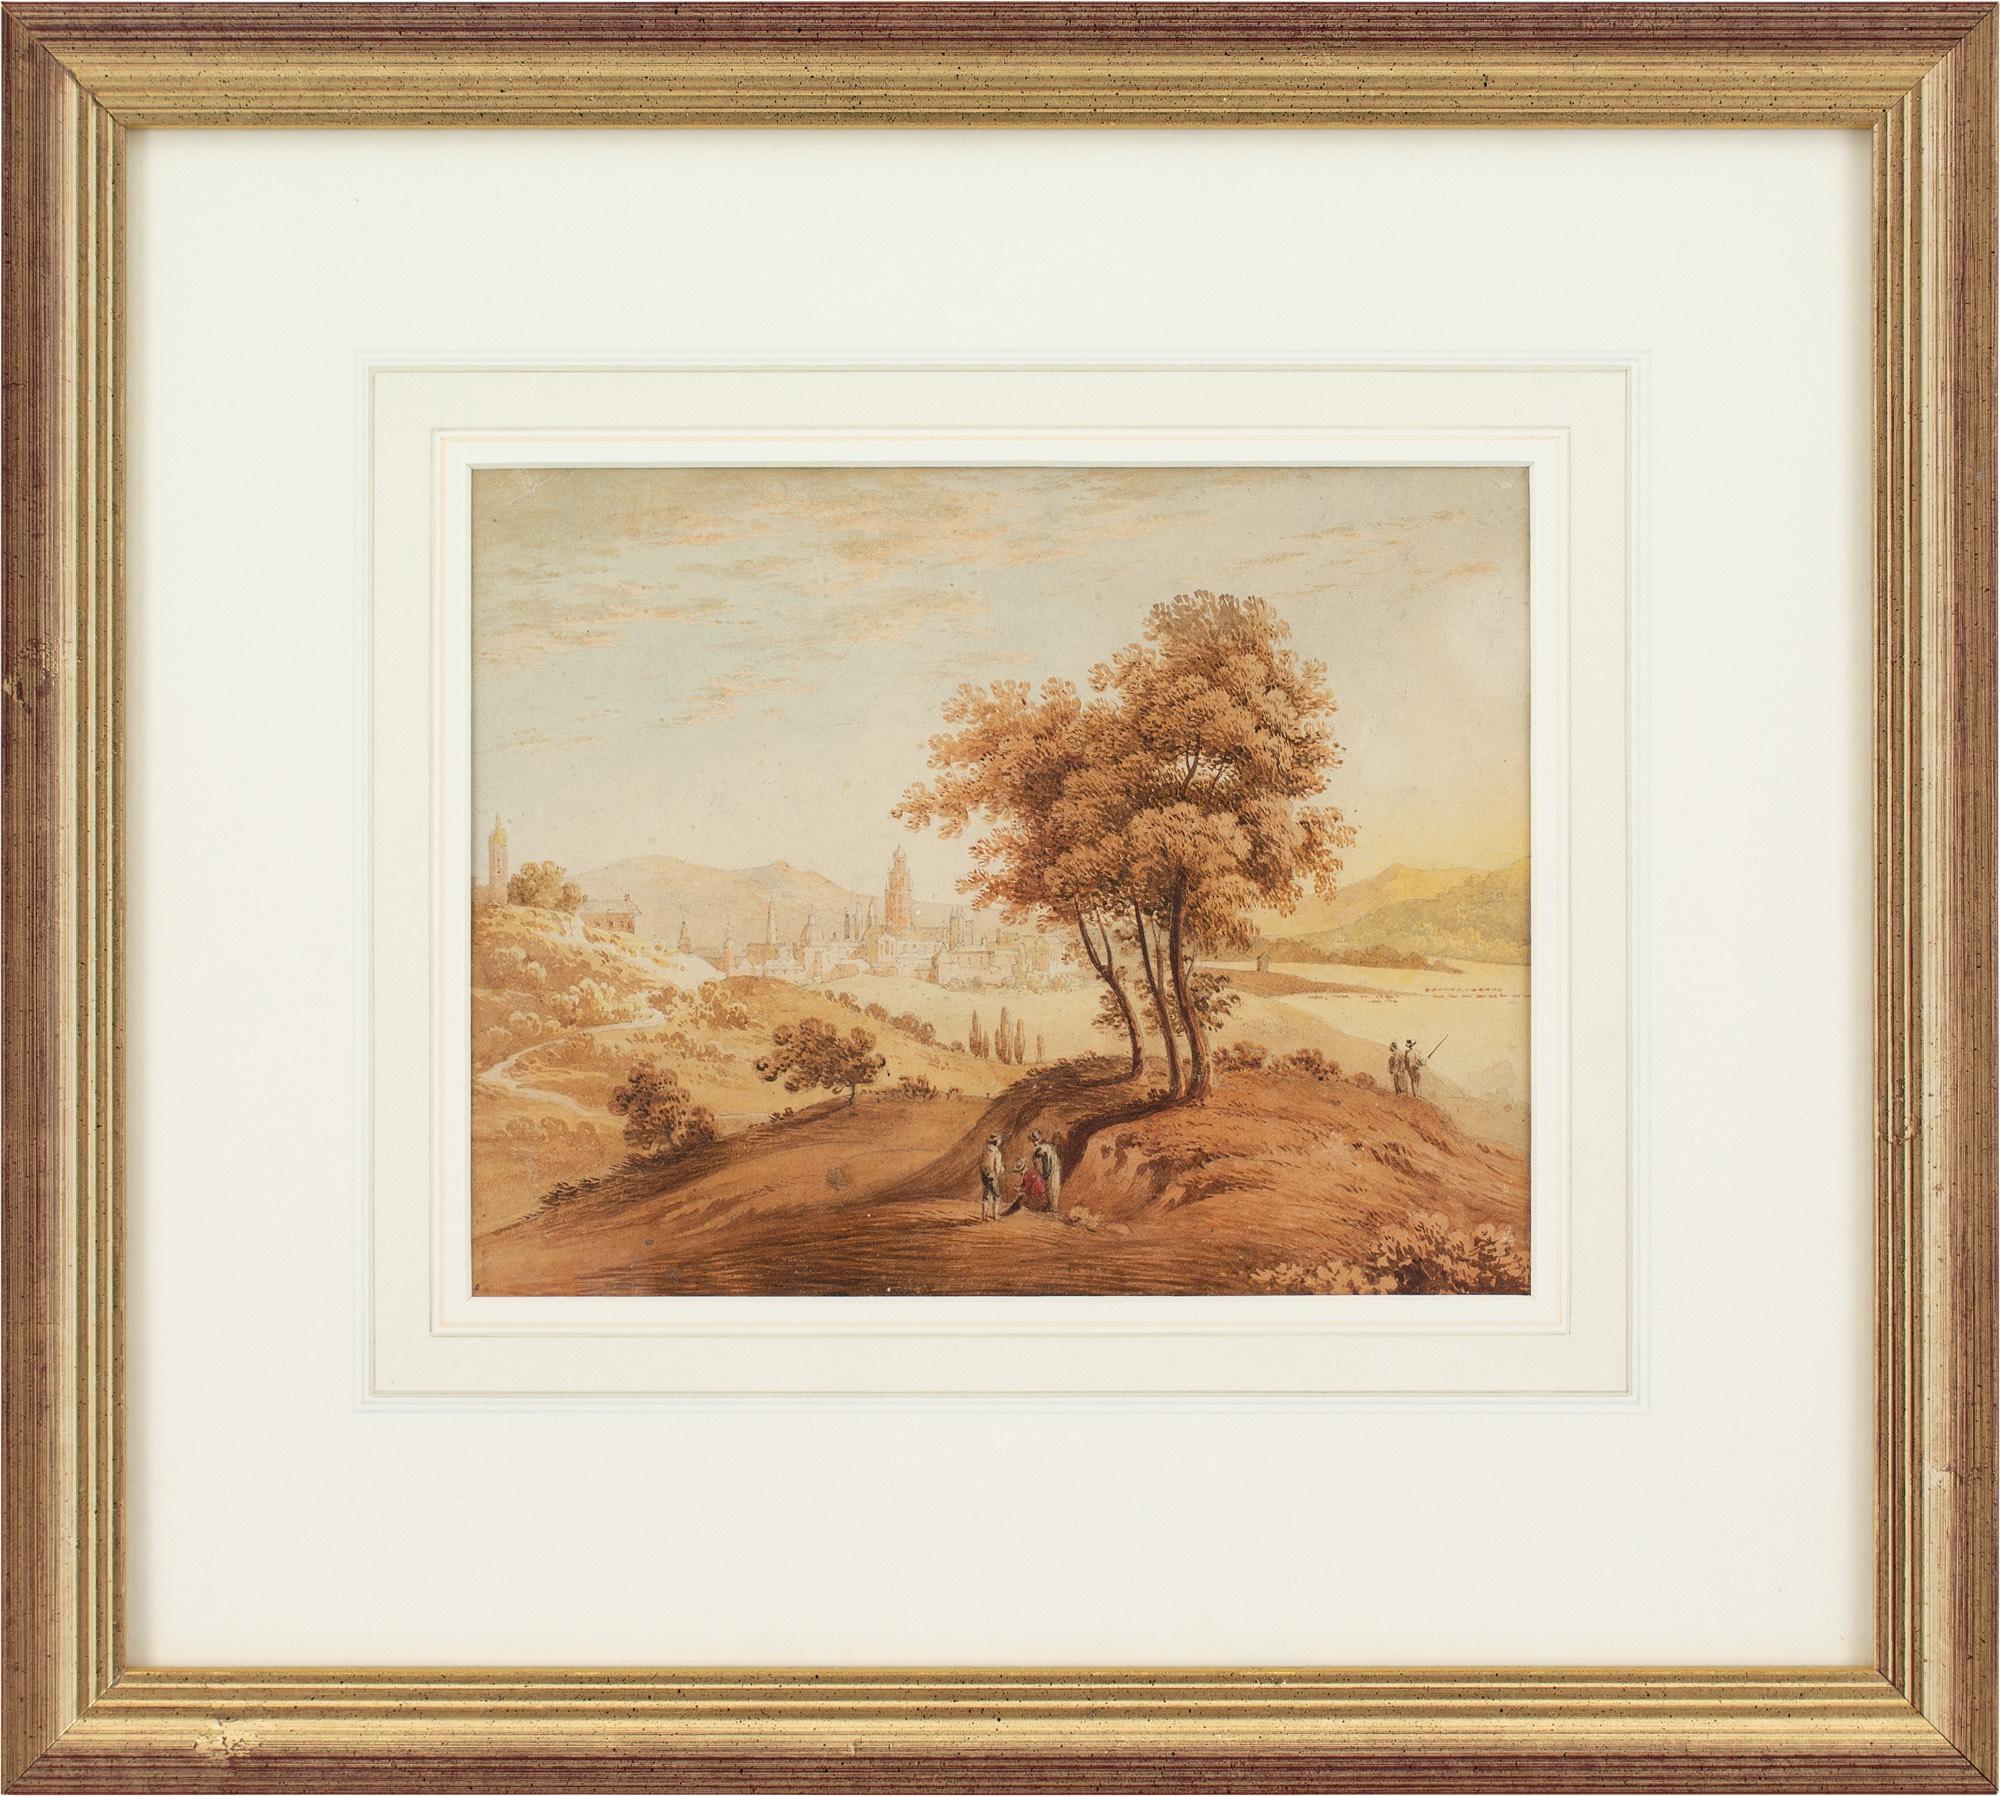 This charming early 19th-century watercolour attributed to English artist John Varley OWS (1778-1842) depicts an Italianate vista with trees, distant town, and figures.

Varley was an energetic watercolourist, astrologer, and close friend of the